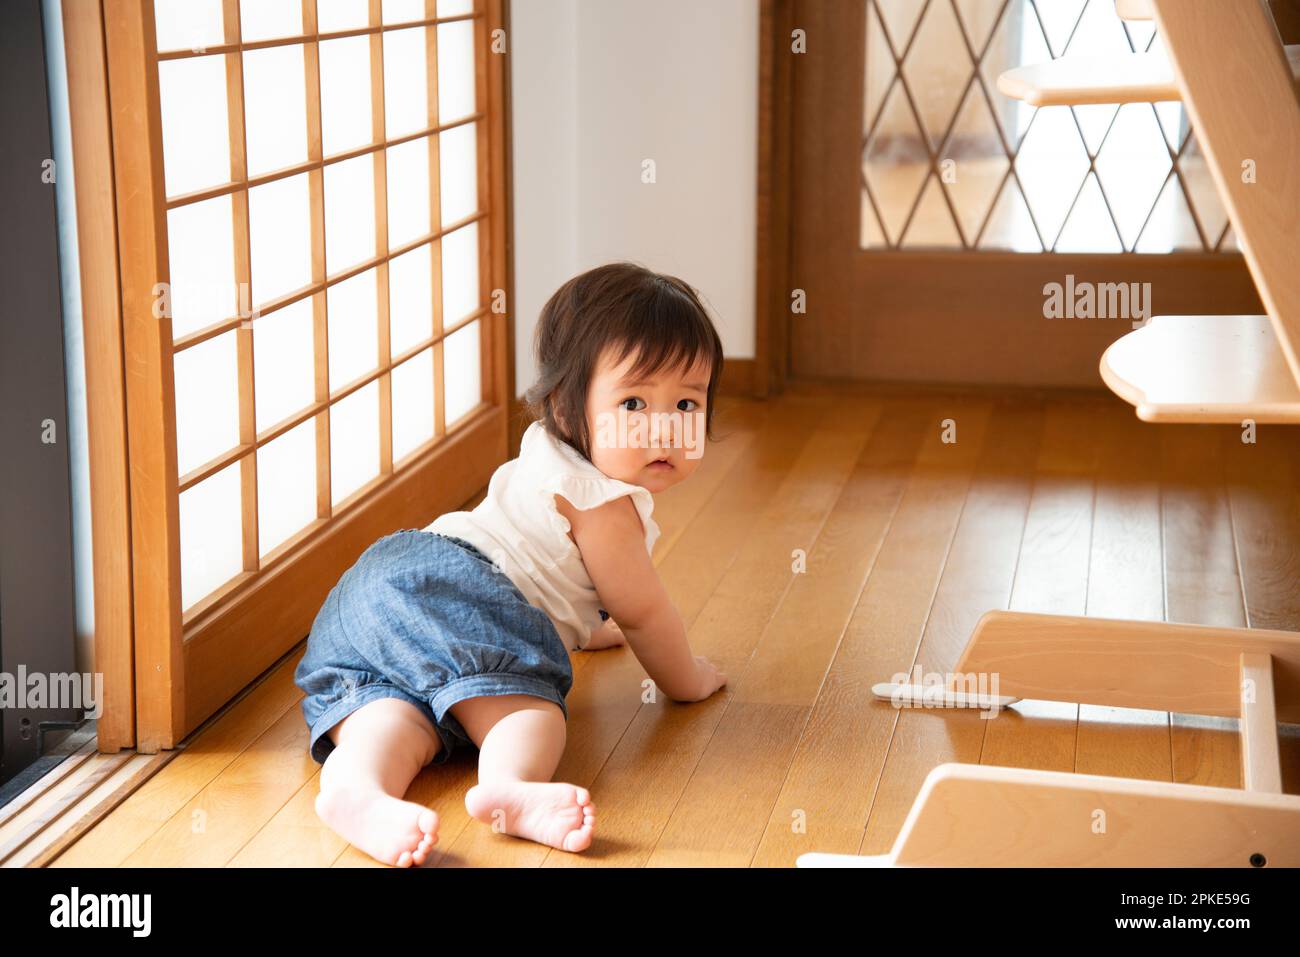 Baby crawling on wooden floor Stock Photo